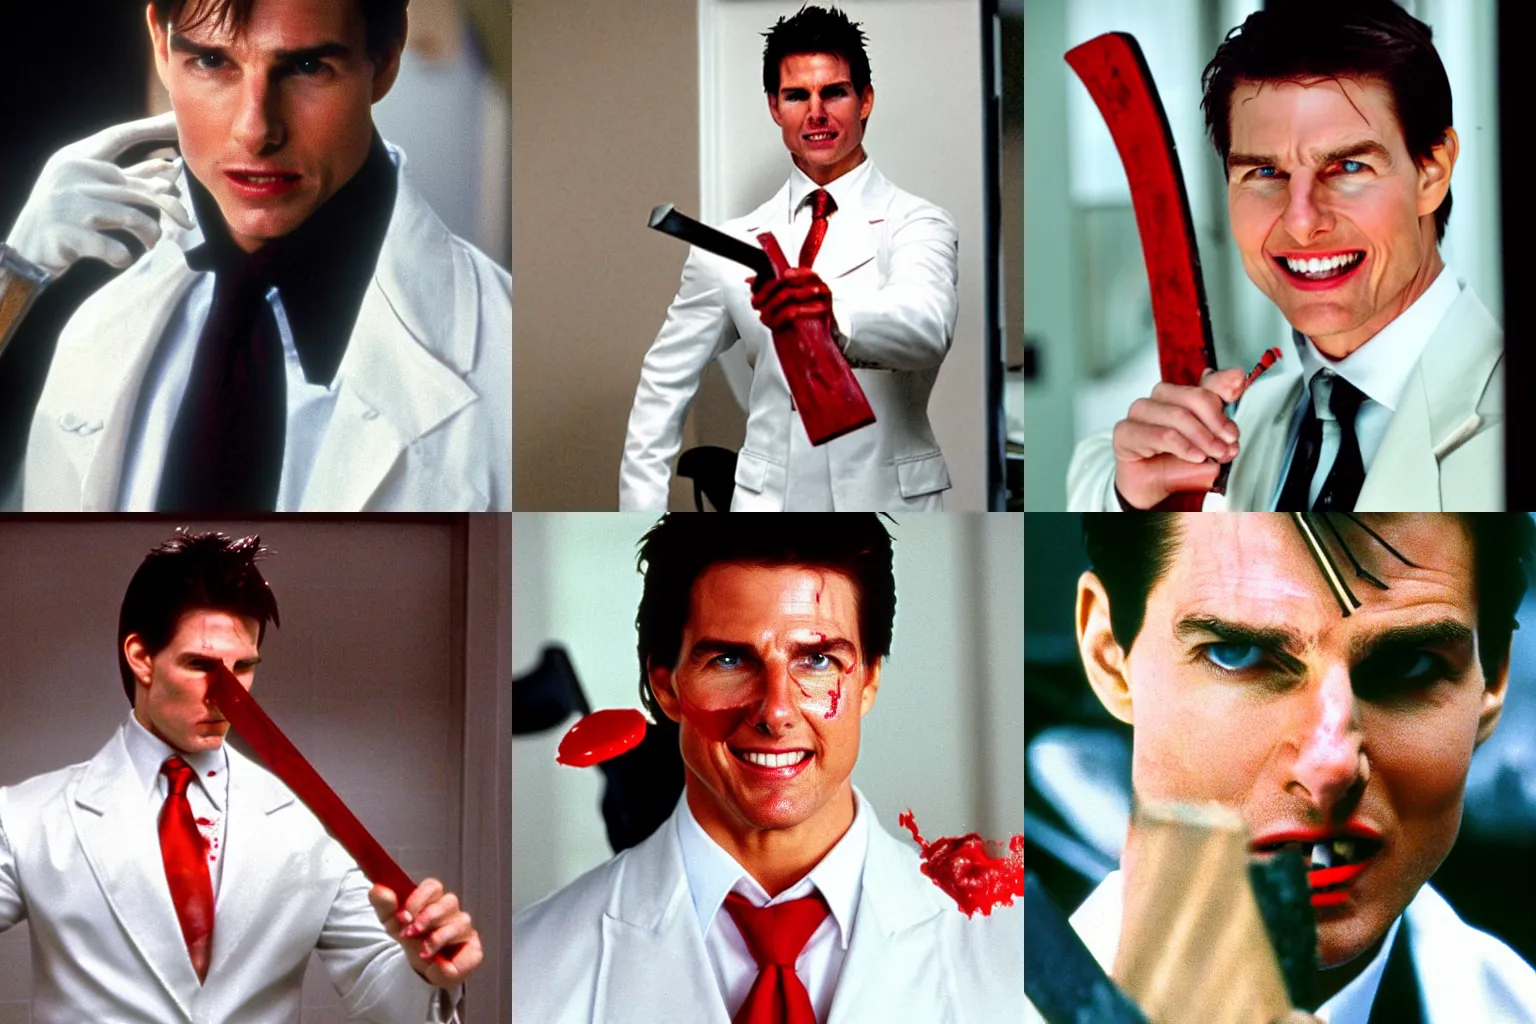 Prompt: tom cruise as patrick bateman from american psycho with an axe in a white coat with blood smiling